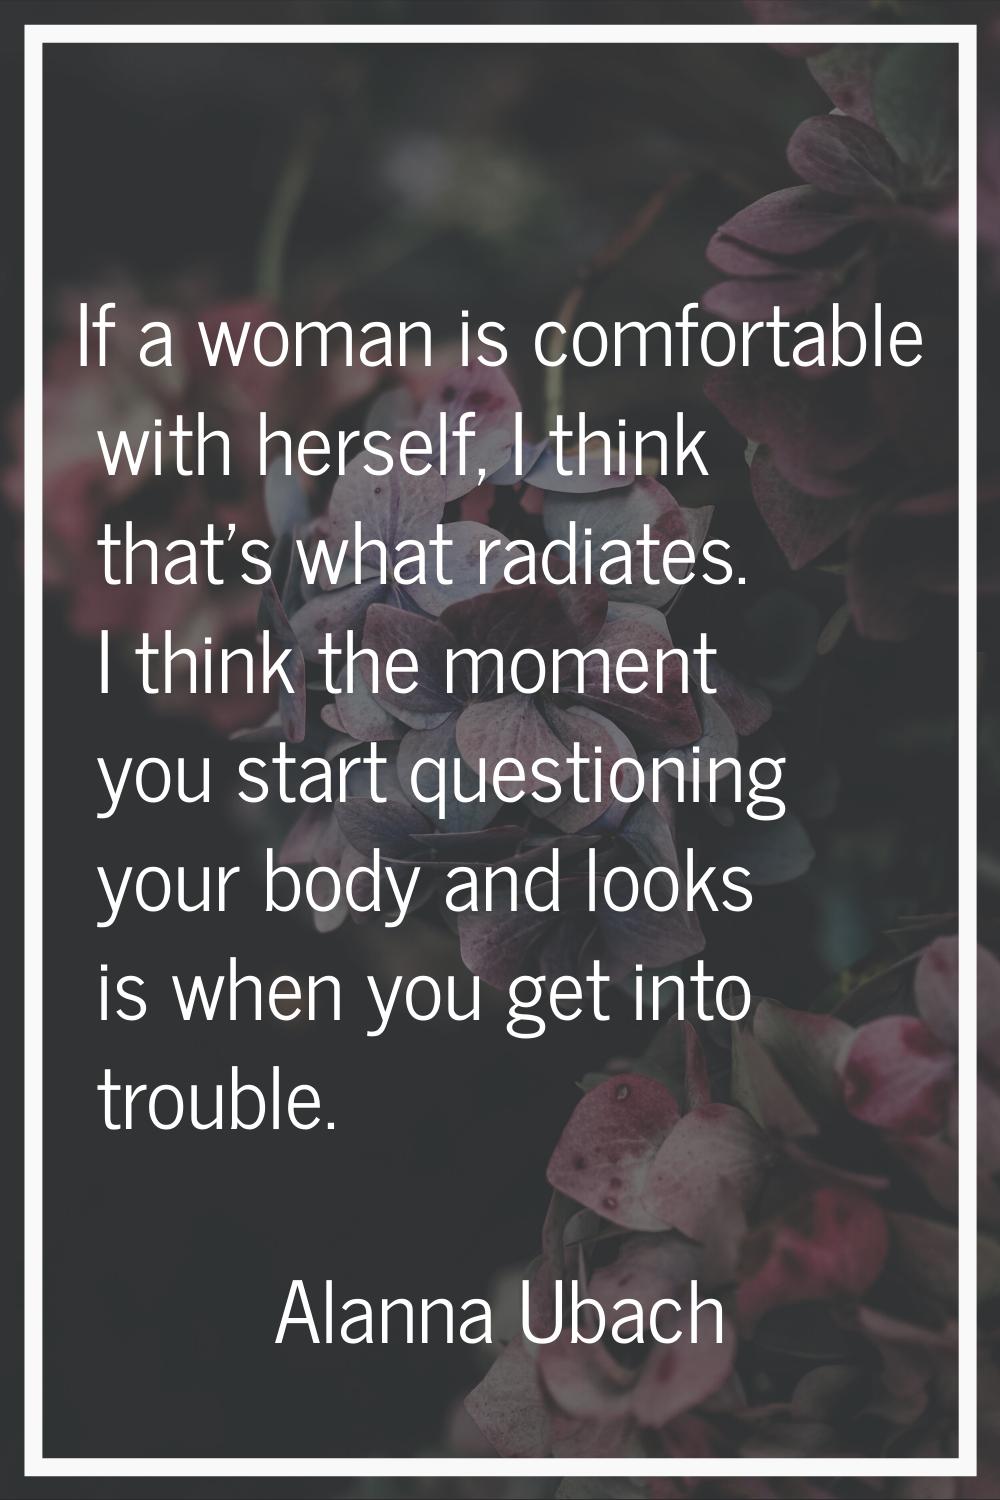 If a woman is comfortable with herself, I think that's what radiates. I think the moment you start 